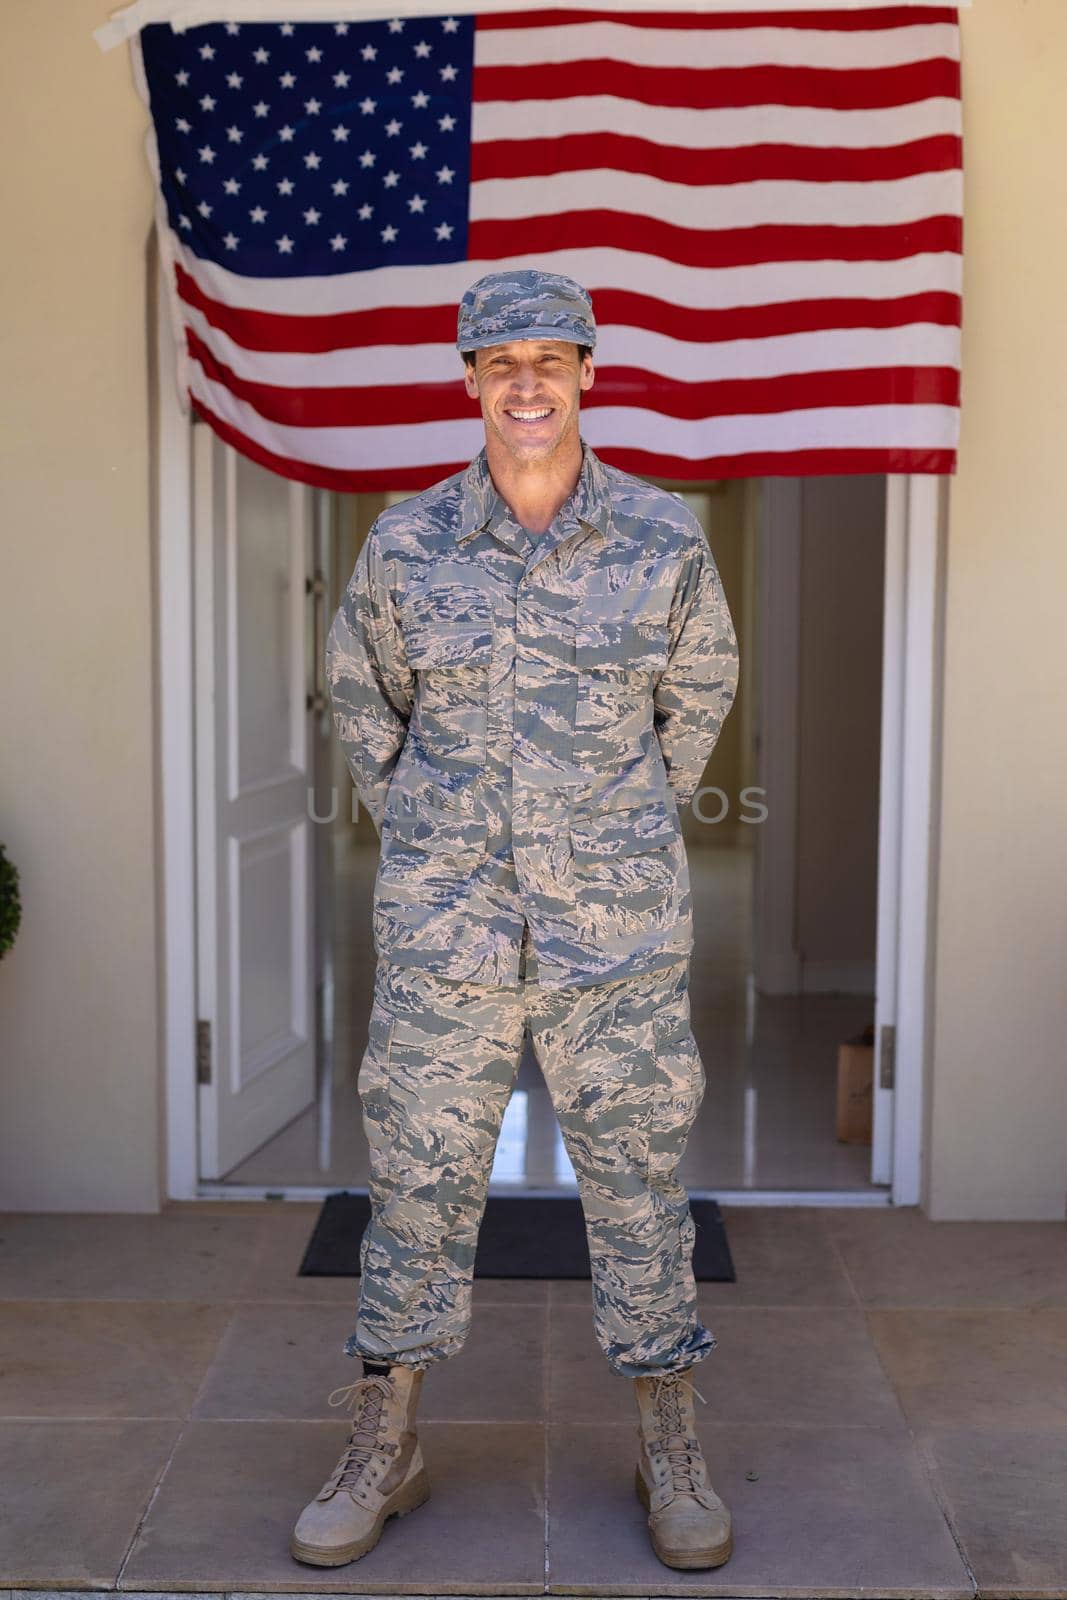 Full length portrait of smiling caucasian army soldier standing against usa flag at entrance. people, patriotism and identity concept, unaltered.